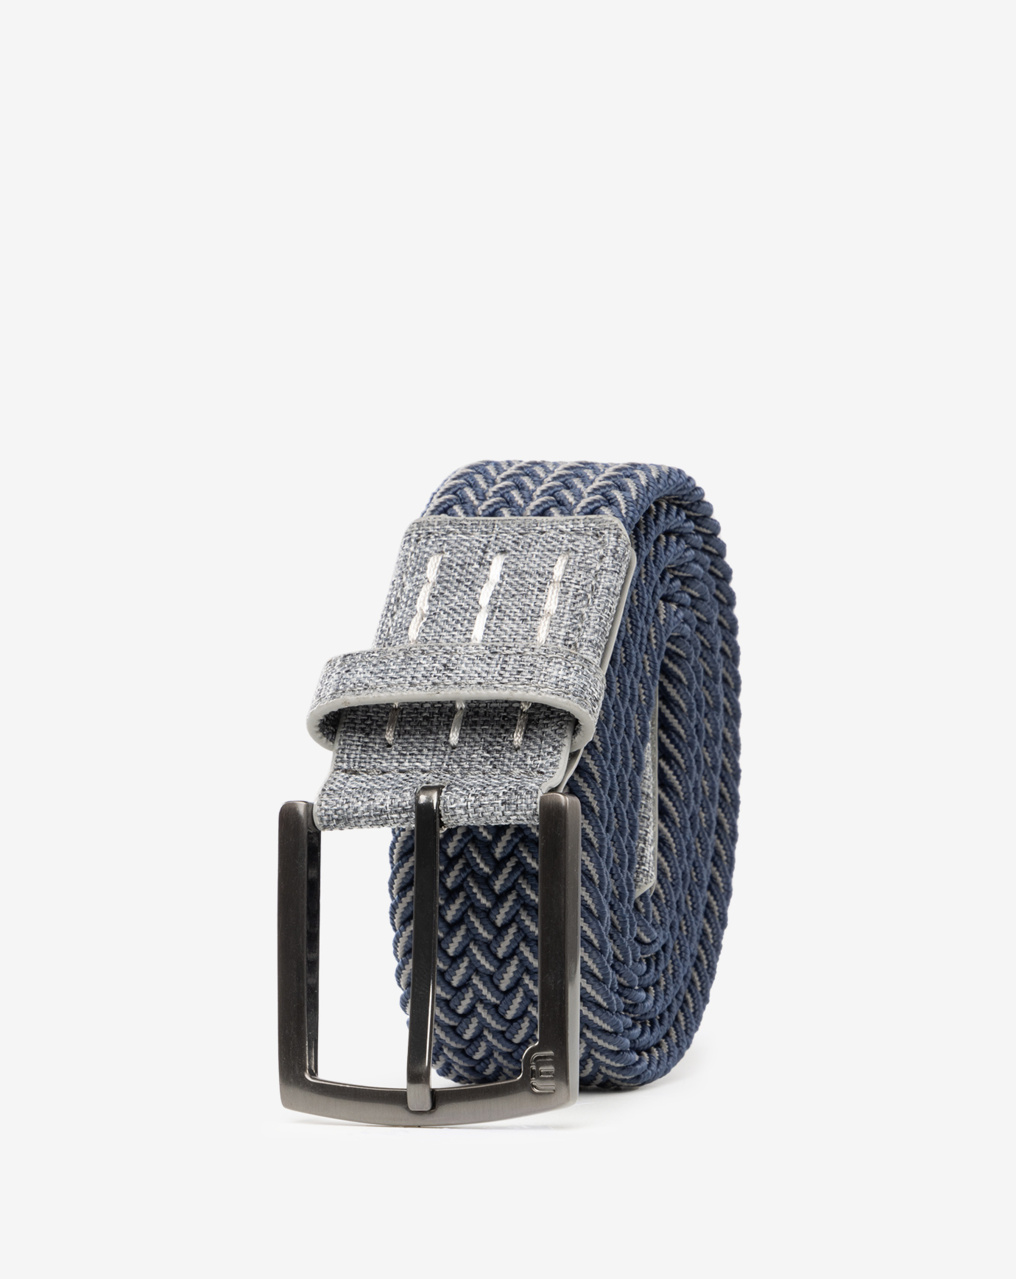 CHEERS 2.0 STRETCH WOVEN BELT 1